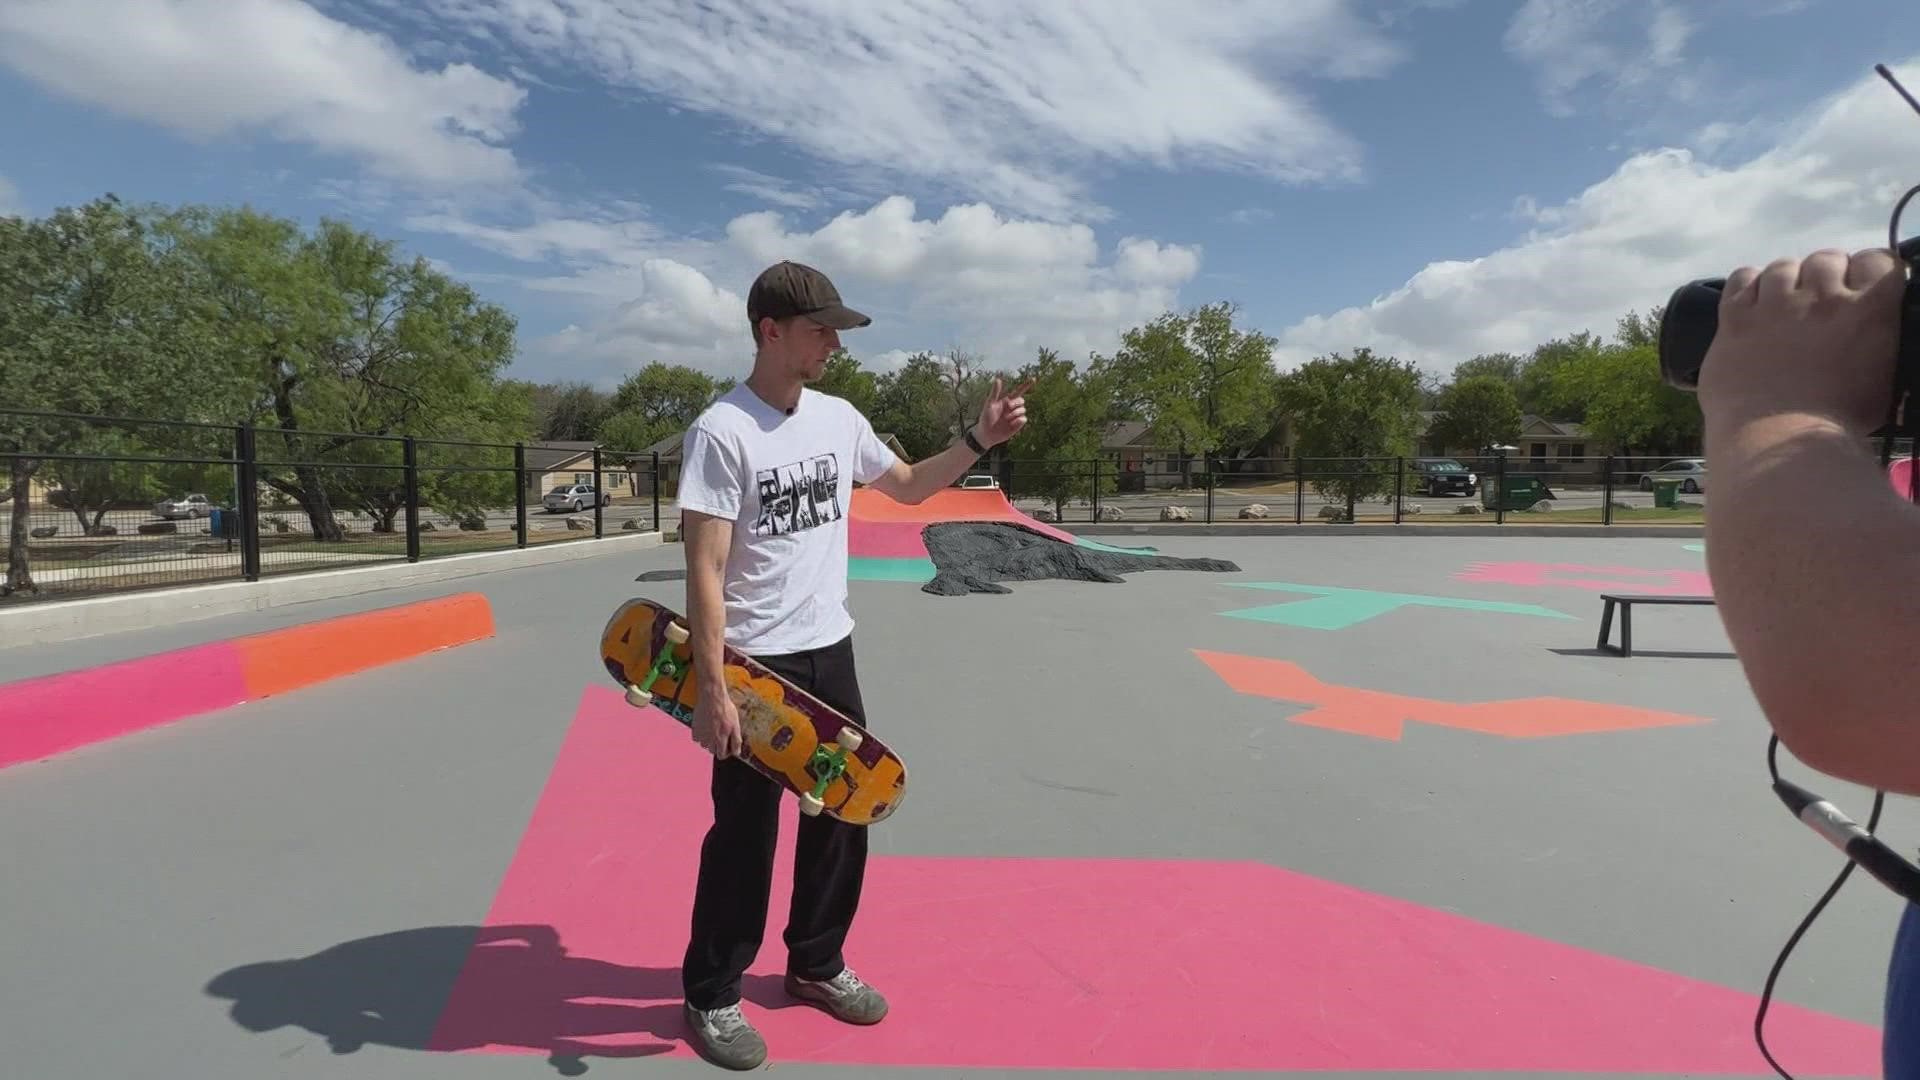 One skater says the vibrant colors spurred him to check it out.